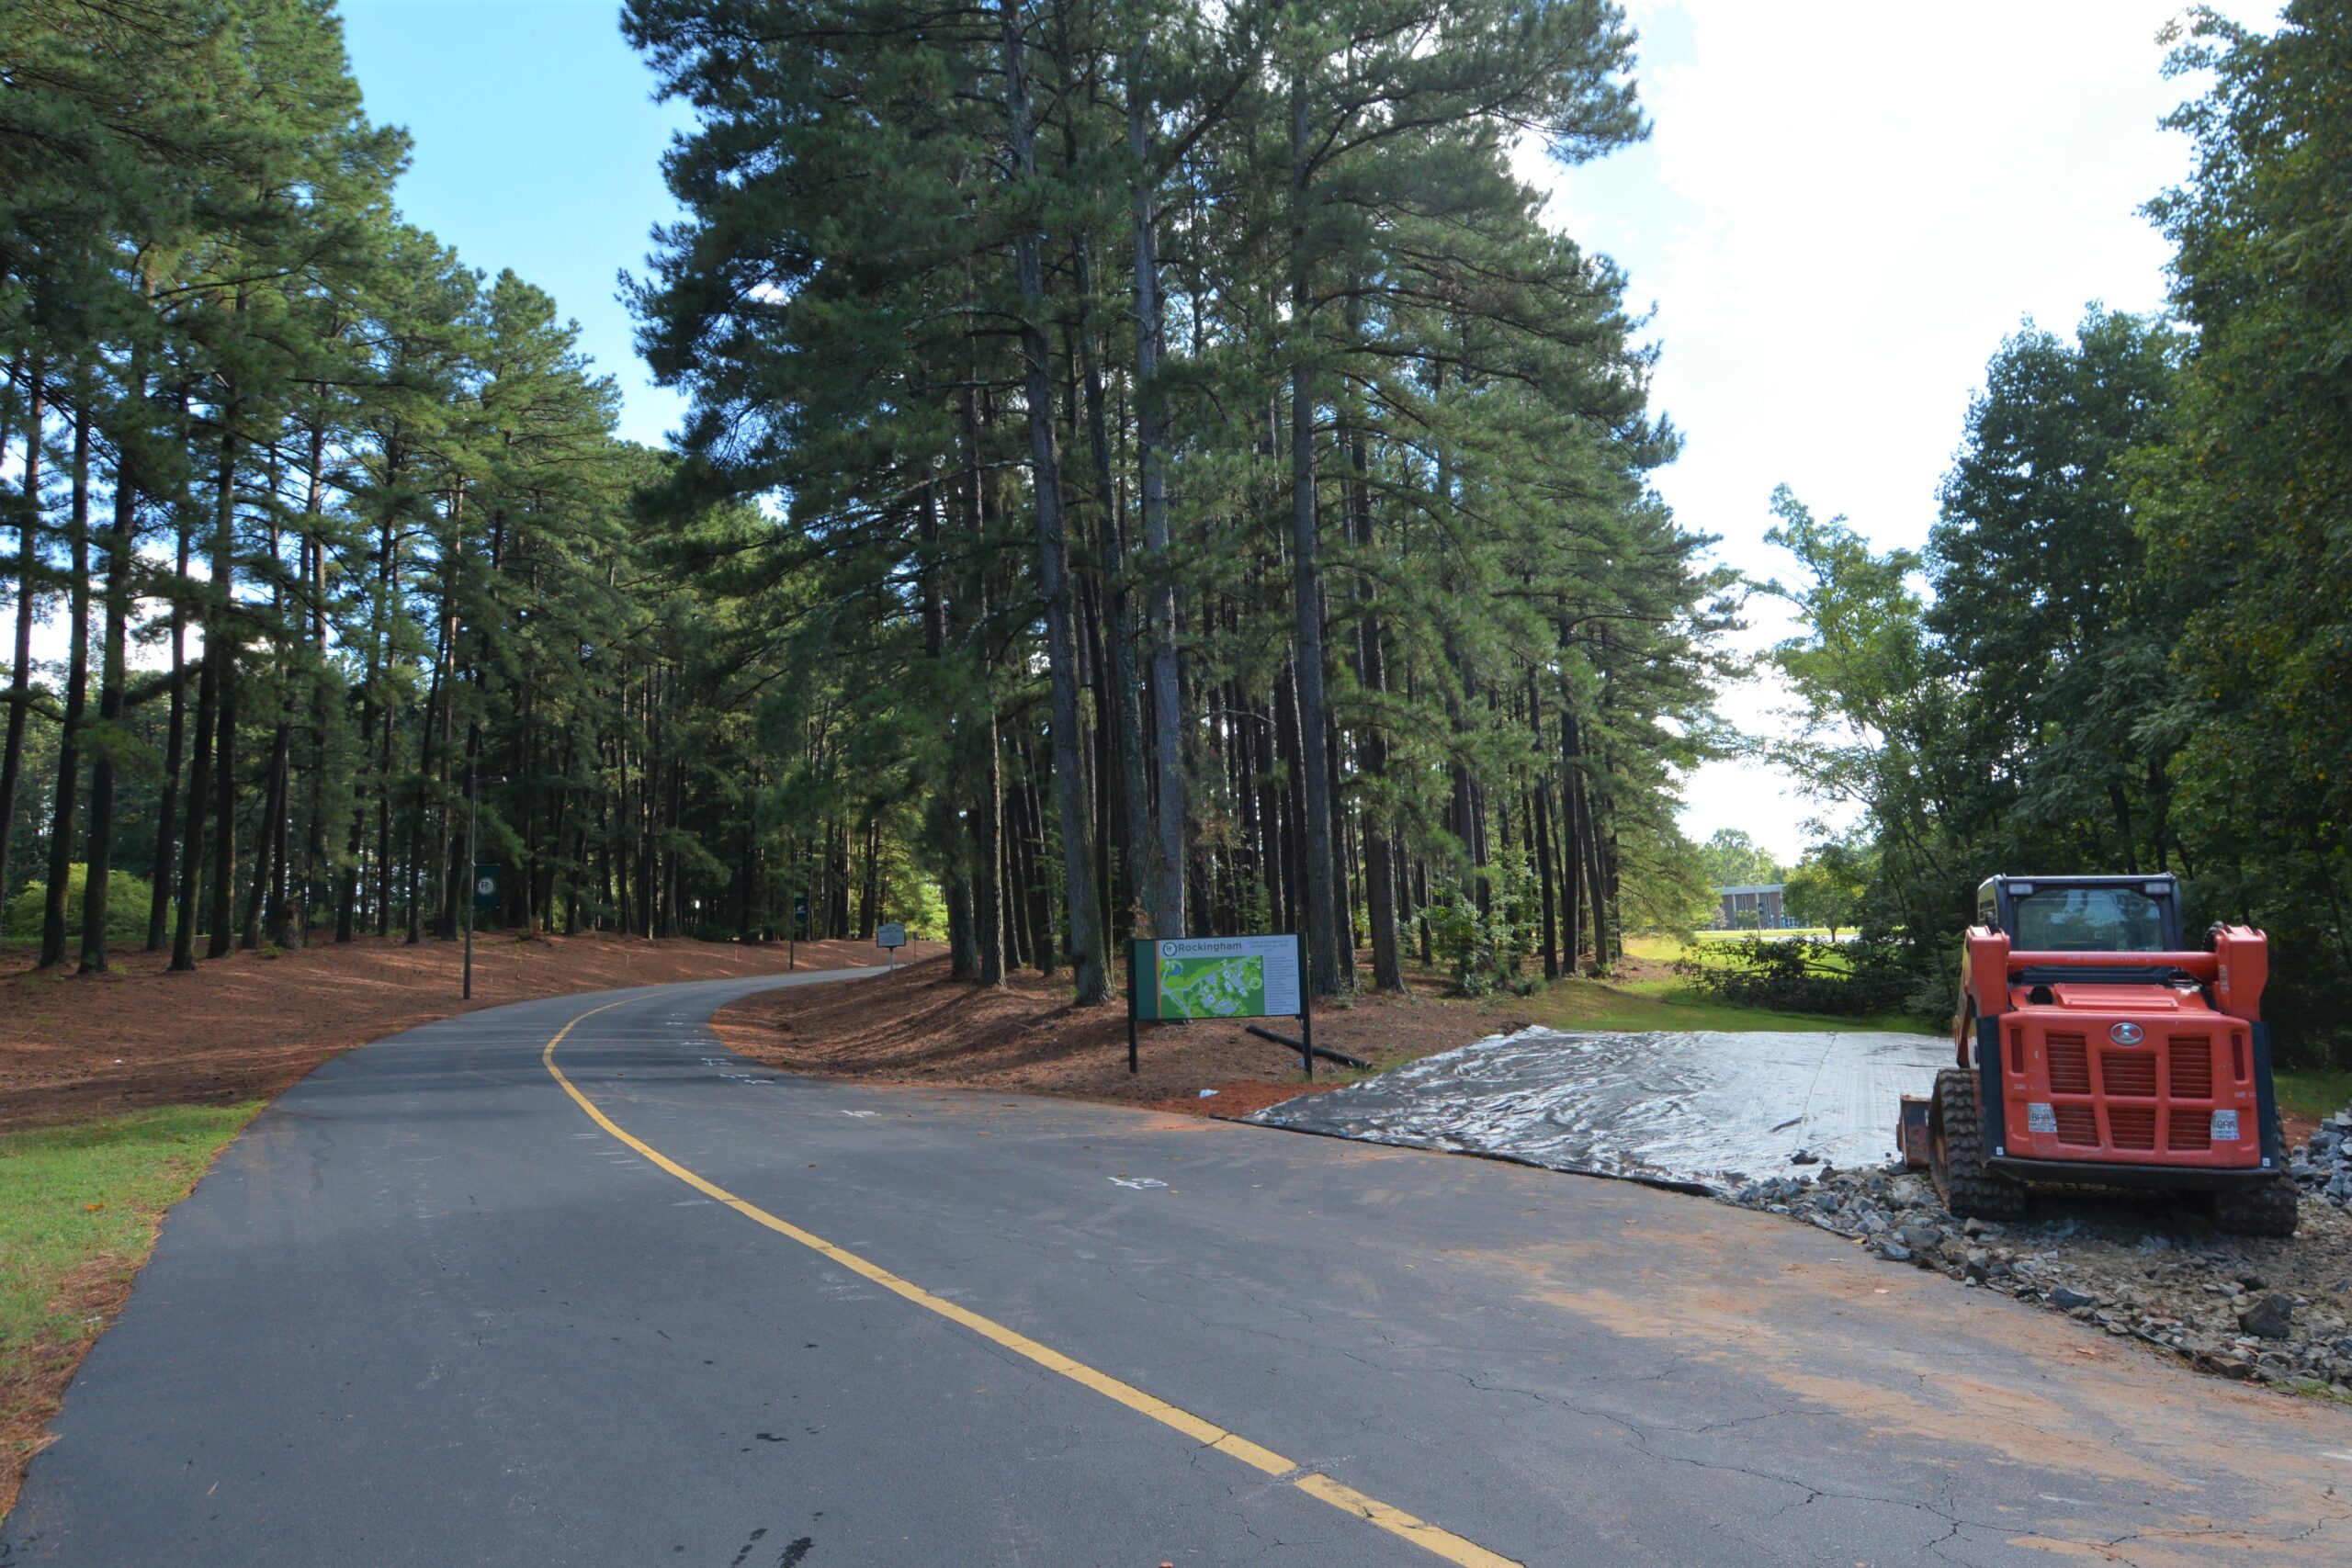 Work begins on the clearing from Wrenn Memorial Road toward the Science Center parking lot, 8/11/2022.